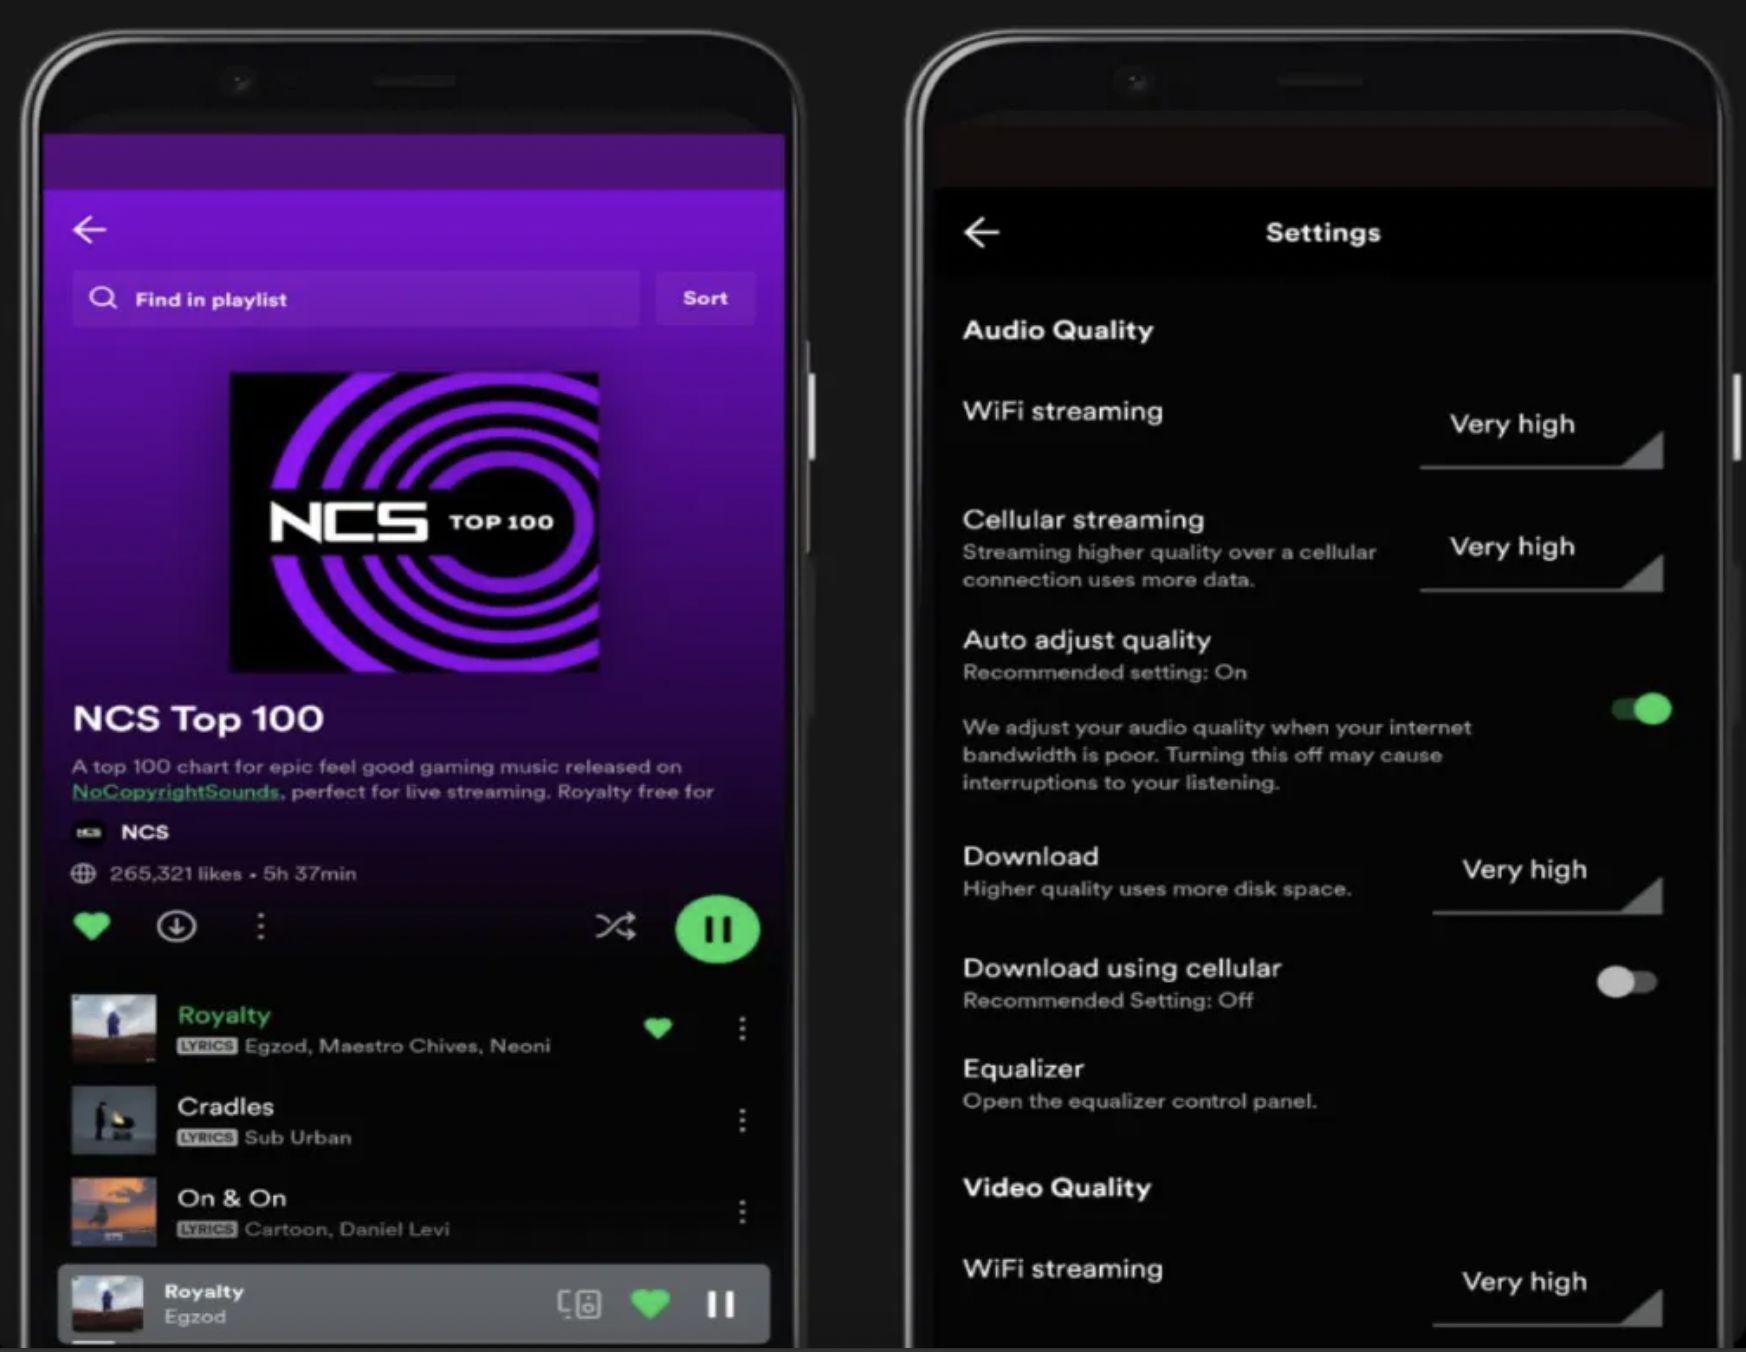 xManager Spotify APK (Premium Music for FREE)